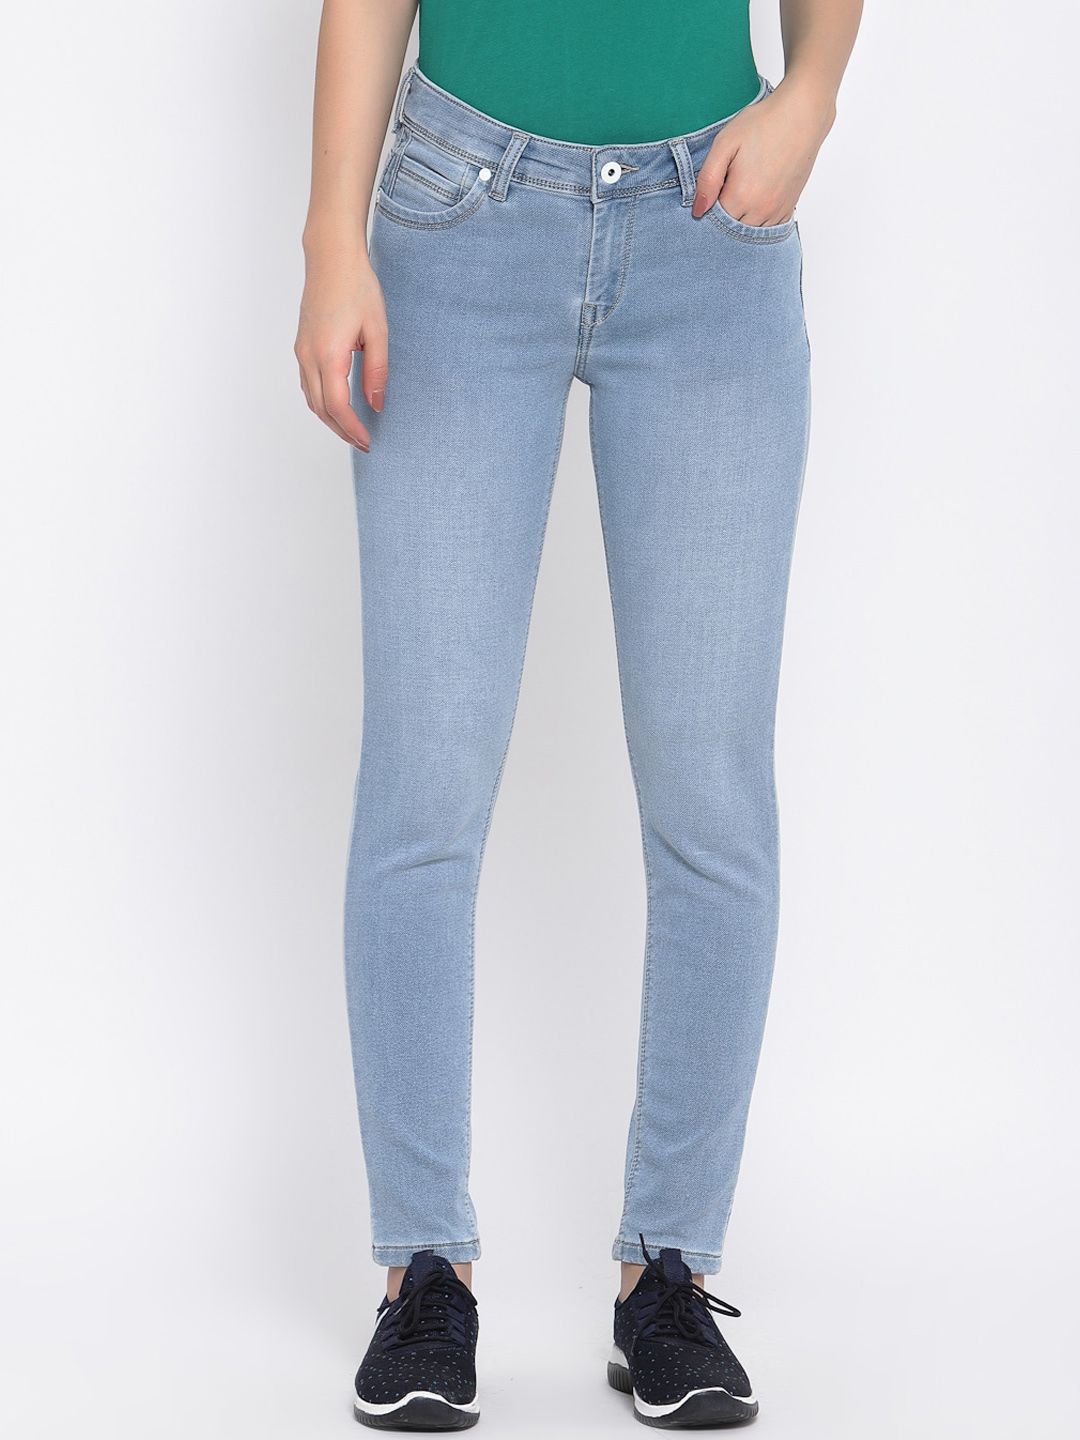 Pepe Jeans Women Blue Skinny Fit Jeans Price in India